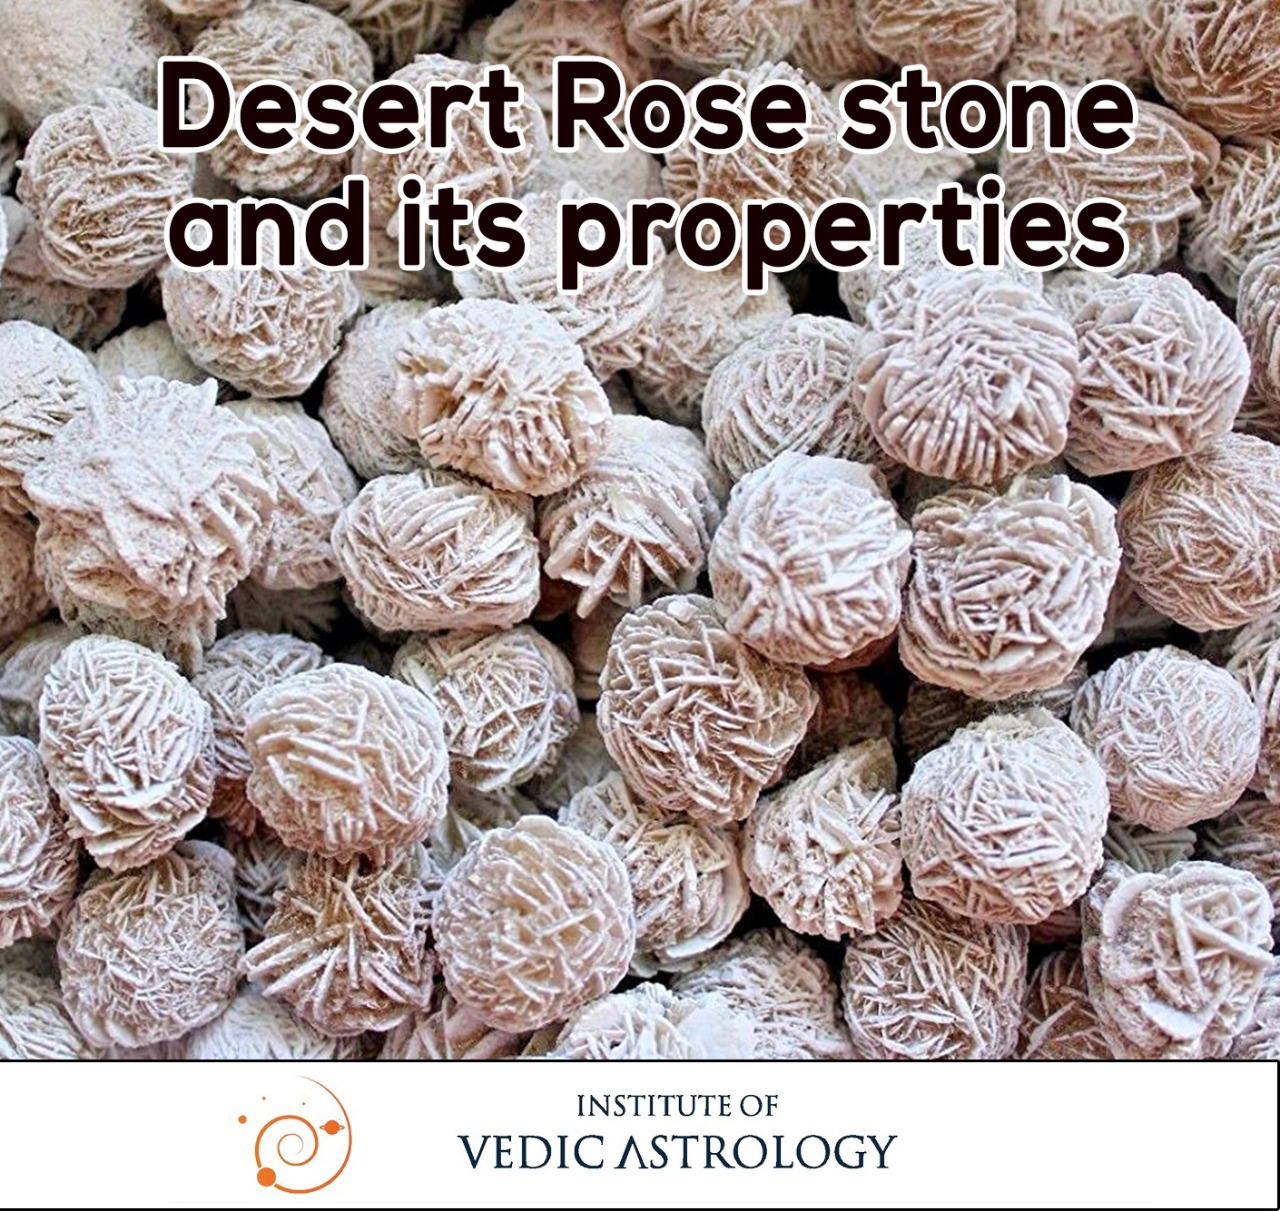 Desert Rose Stone and its properties